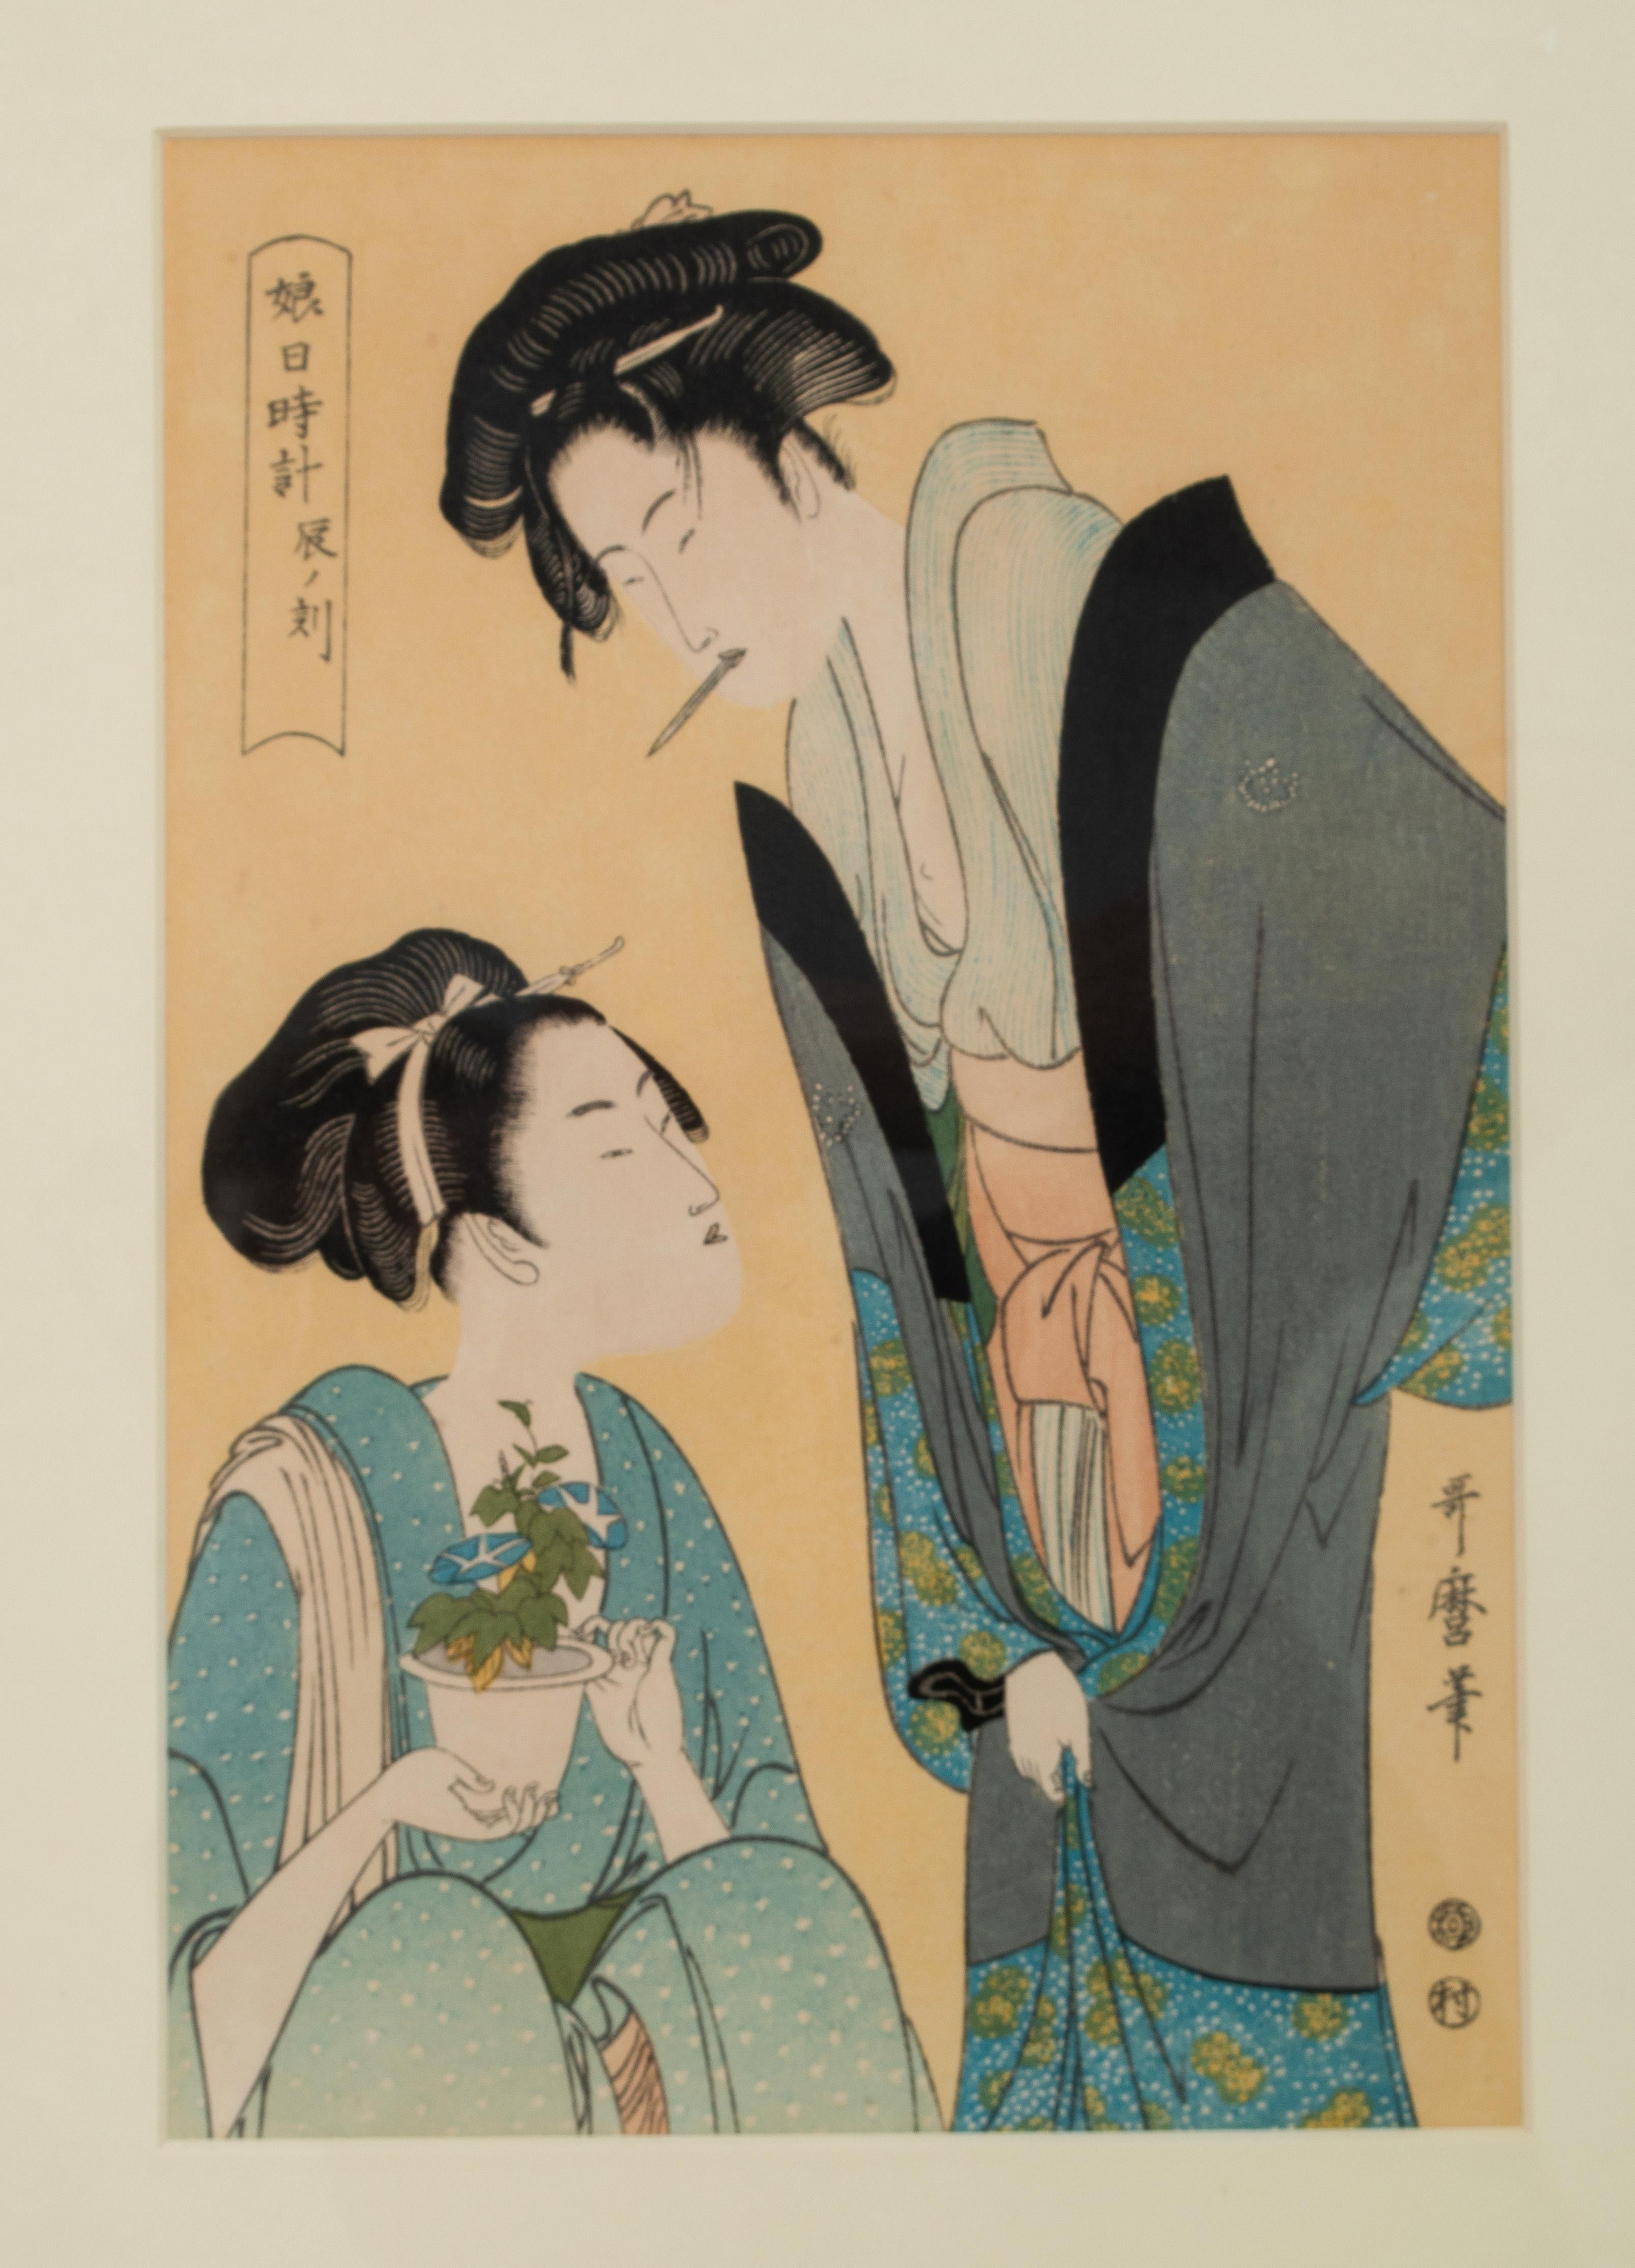 Early 20th century Japanese woodblock print depicting courtesans, After Kitagawa Utamaro
C.1920

Kitagawa Utamaro (Japanese, ca. 1754–1806)
Woodblock print; ink and colour on paper originally dating from the Edo period (1615–1868).
Framed and